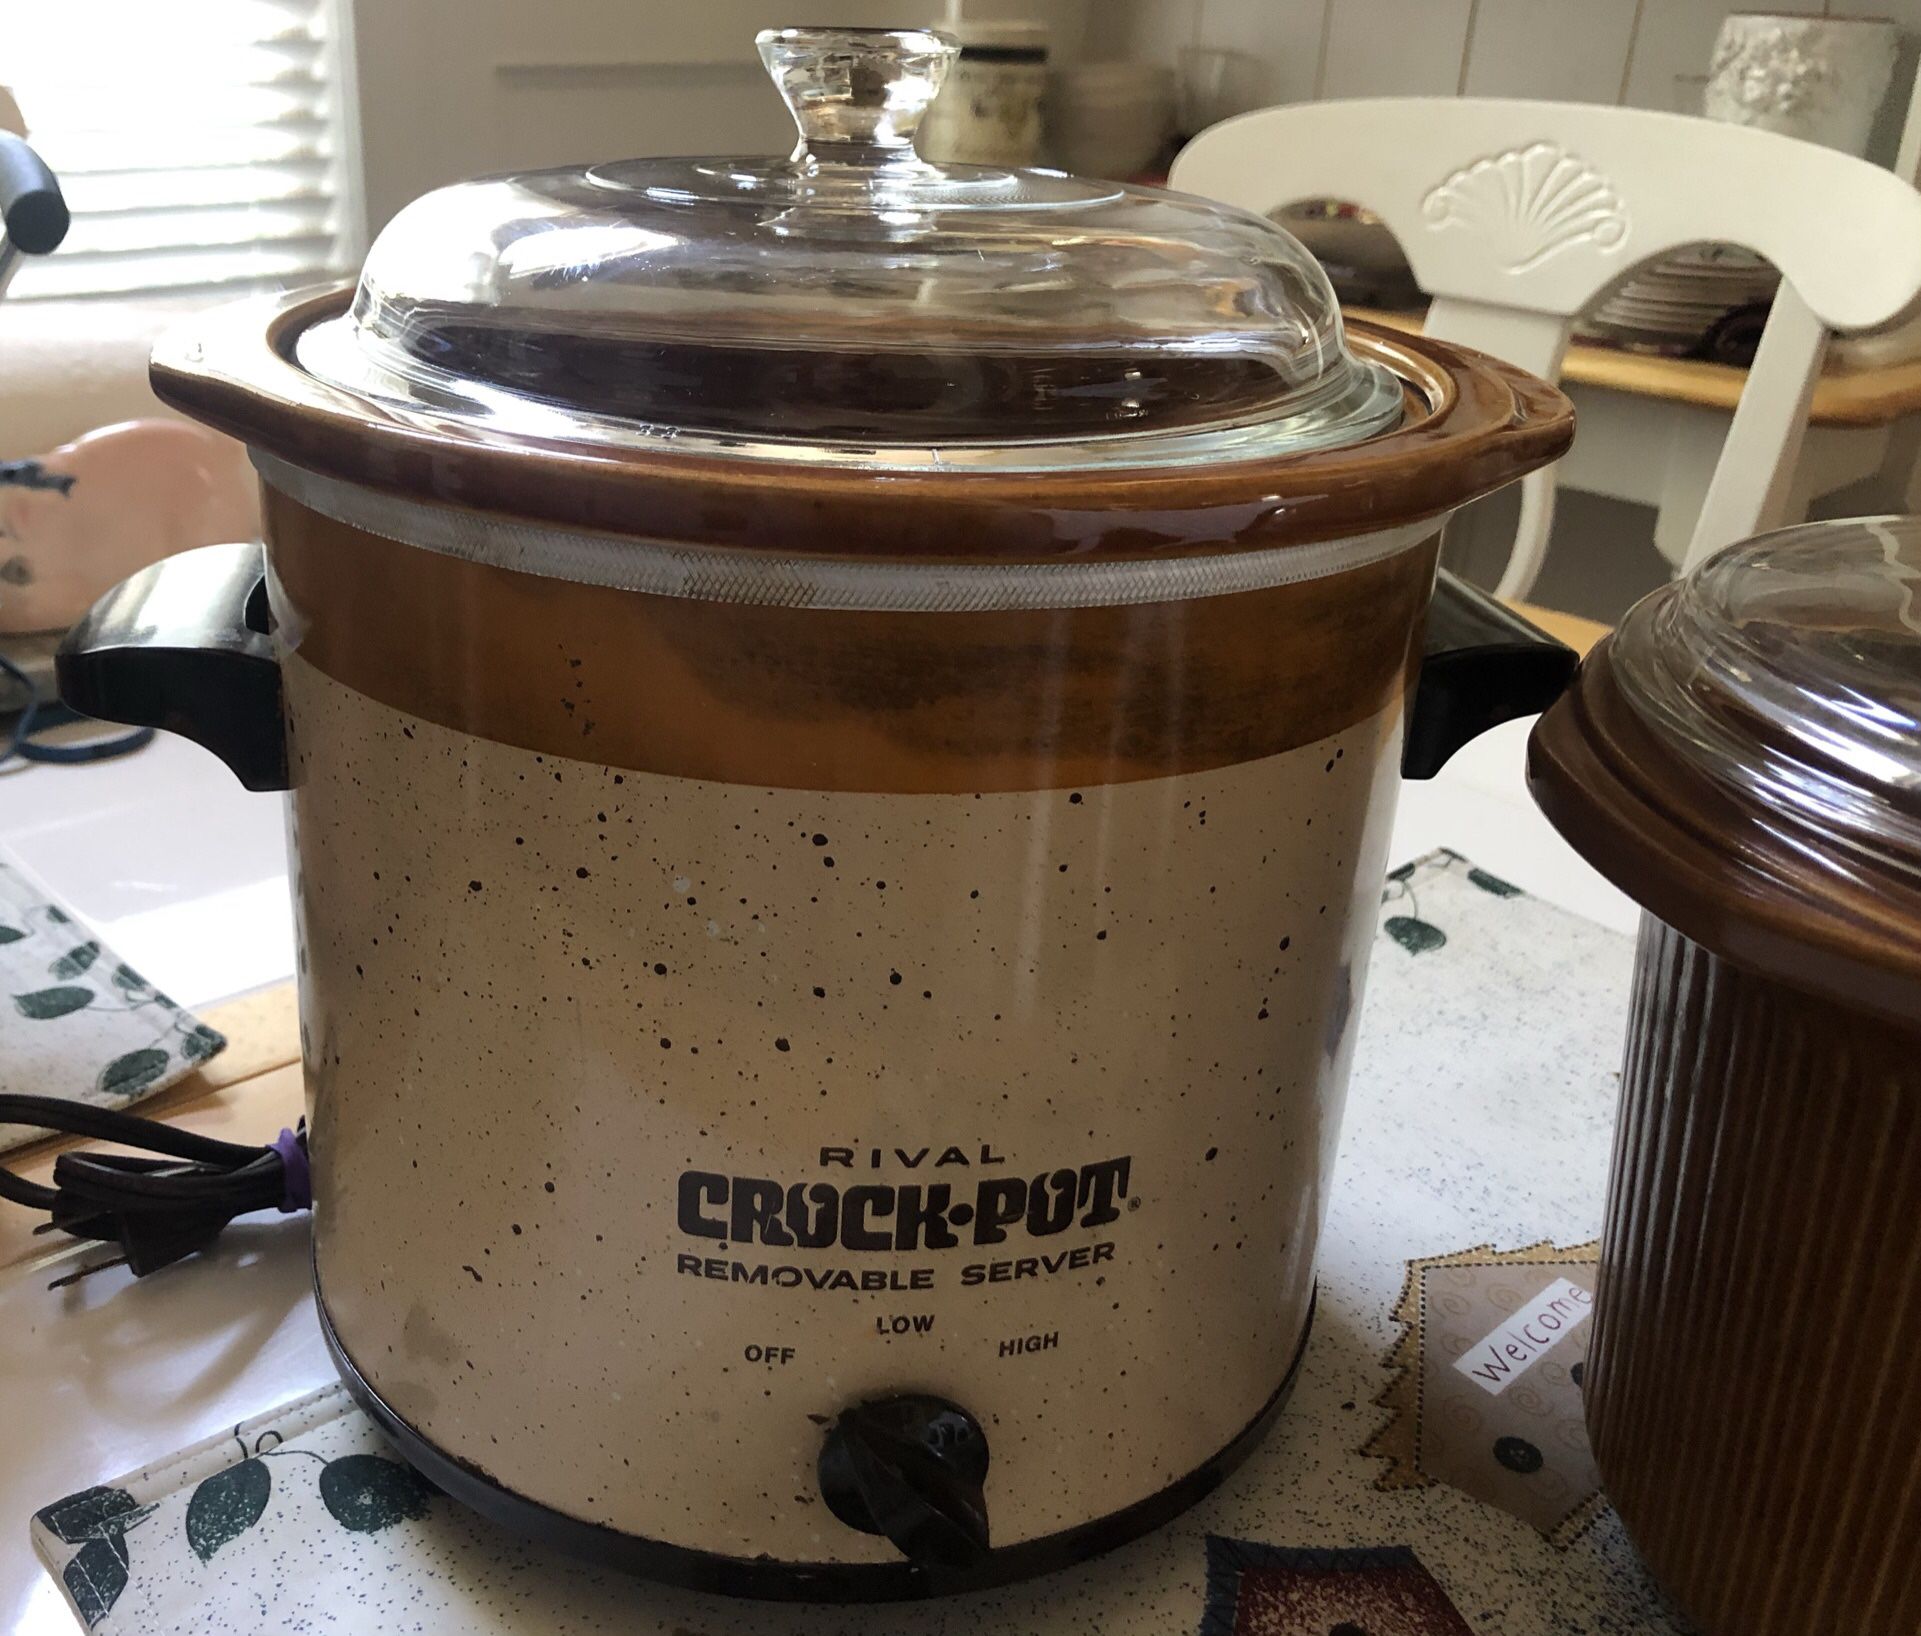 Vintage Rival Emerald Green Crock Pot Slow Cooker for Sale in Plano, TX -  OfferUp